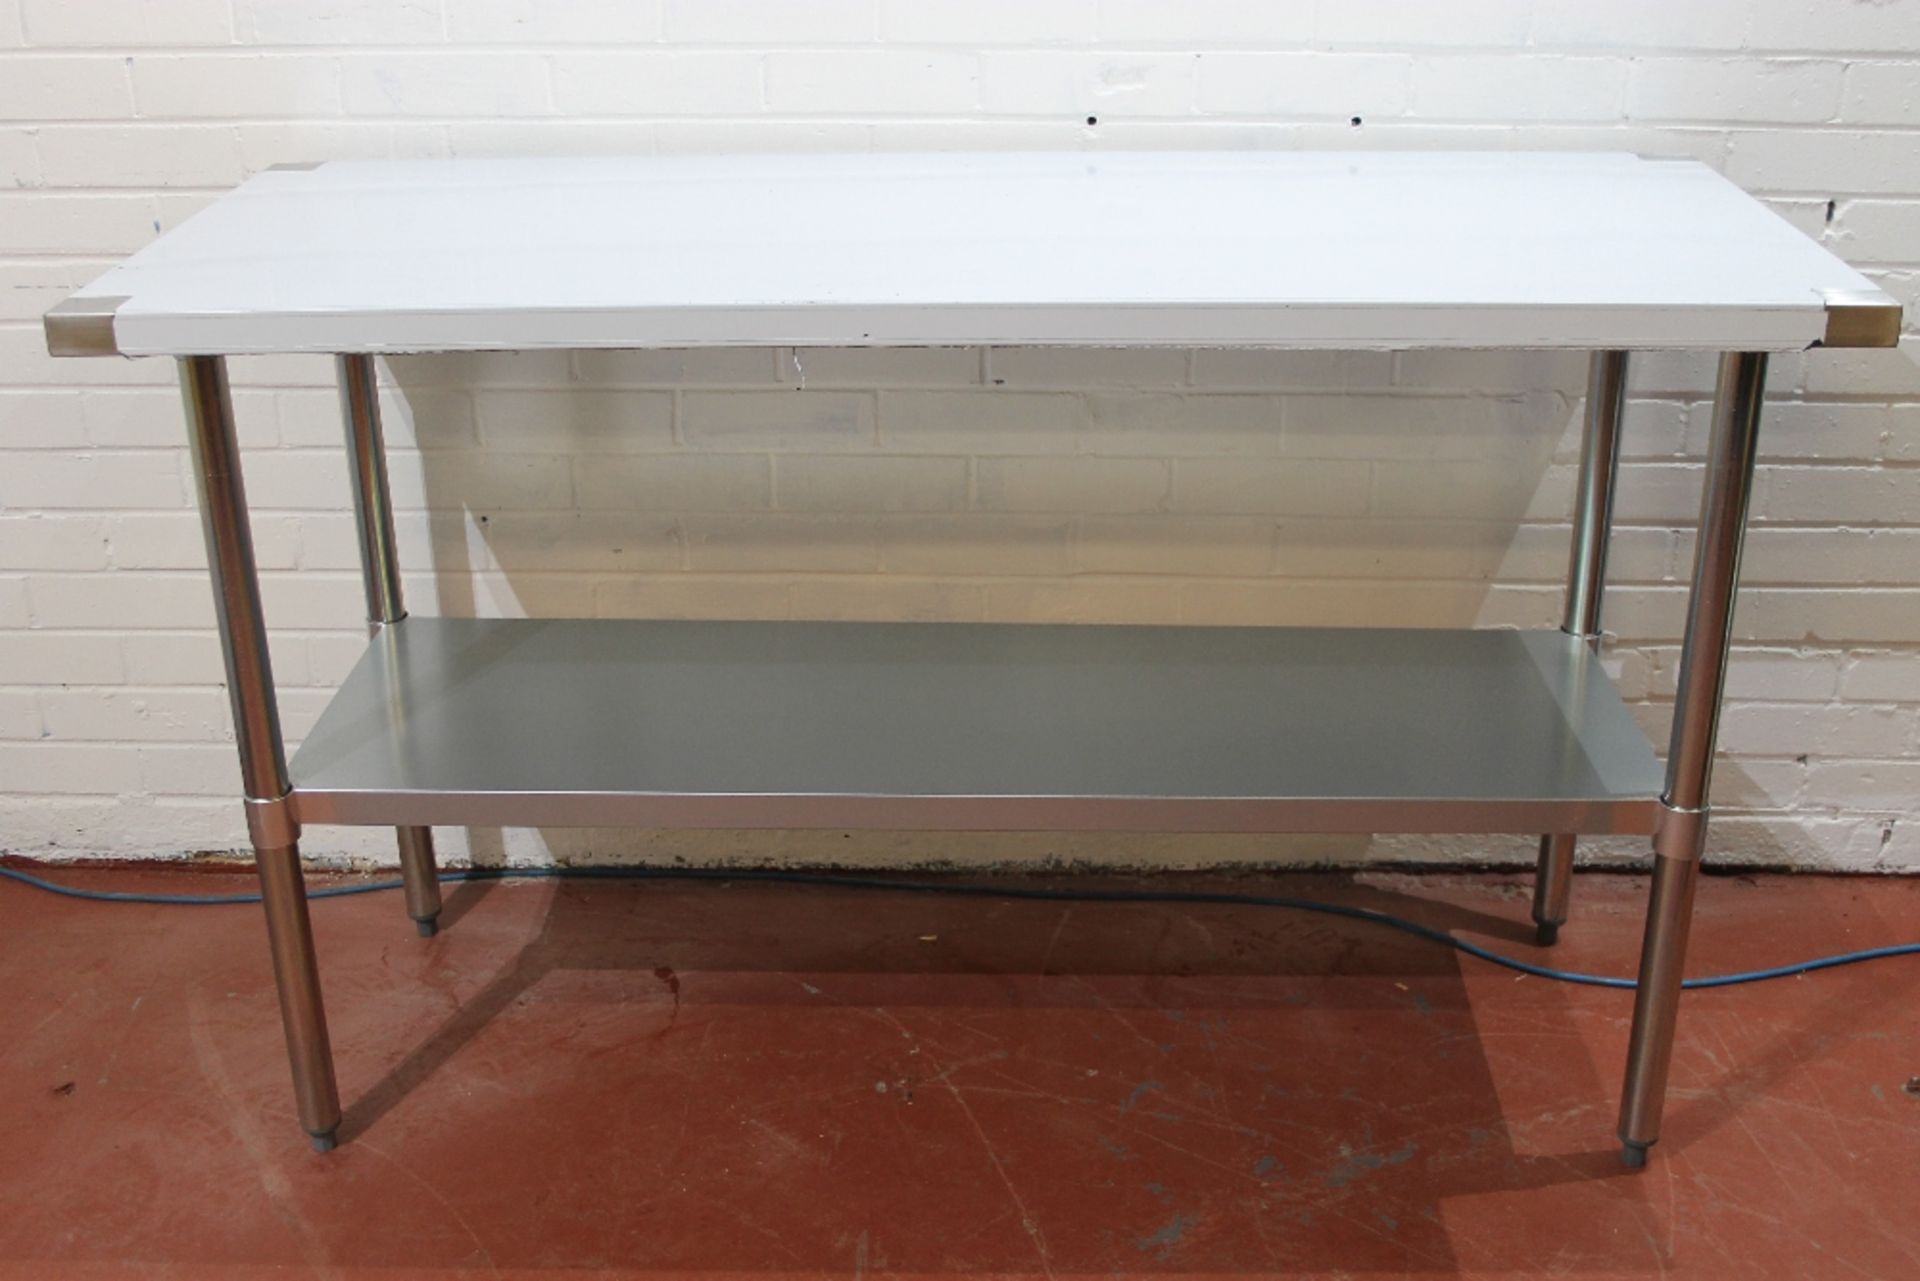 New Stainless Steel Table – Boxed – 1500 x 600 mm